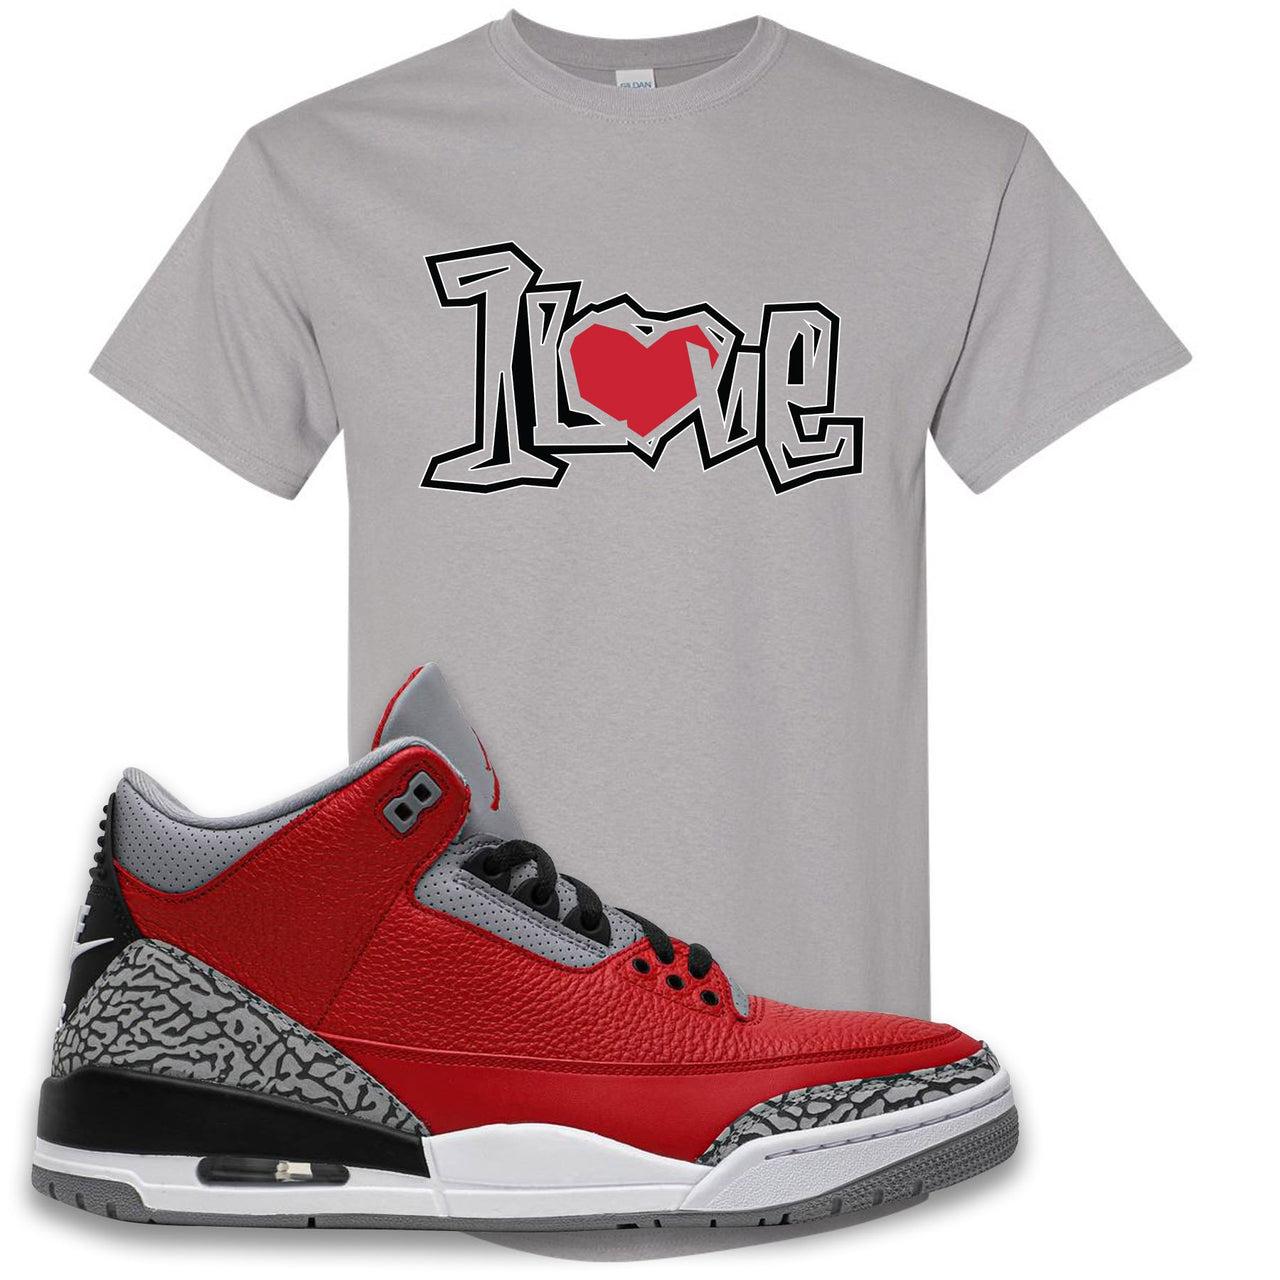 Jordan 3 Red Cement Chicago All-Star Sneaker Gravel T Shirt | Tees to match Jordan 3 All Star Red Cement Shoes | 1 Love